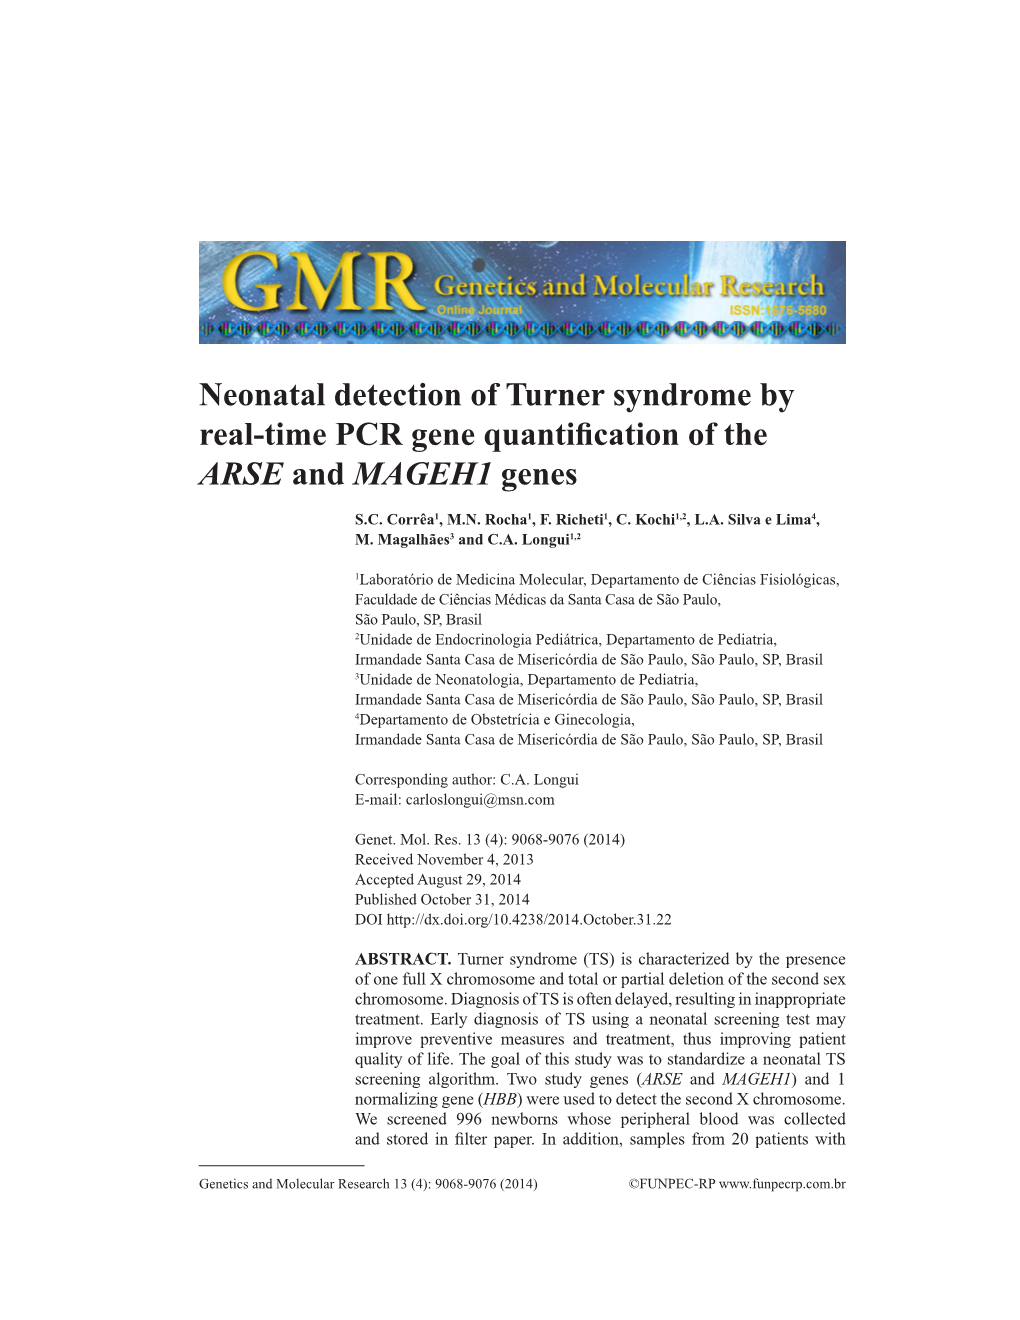 Neonatal Detection of Turner Syndrome by Real-Time PCR Gene Quantification of the ARSE and MAGEH1 Genes